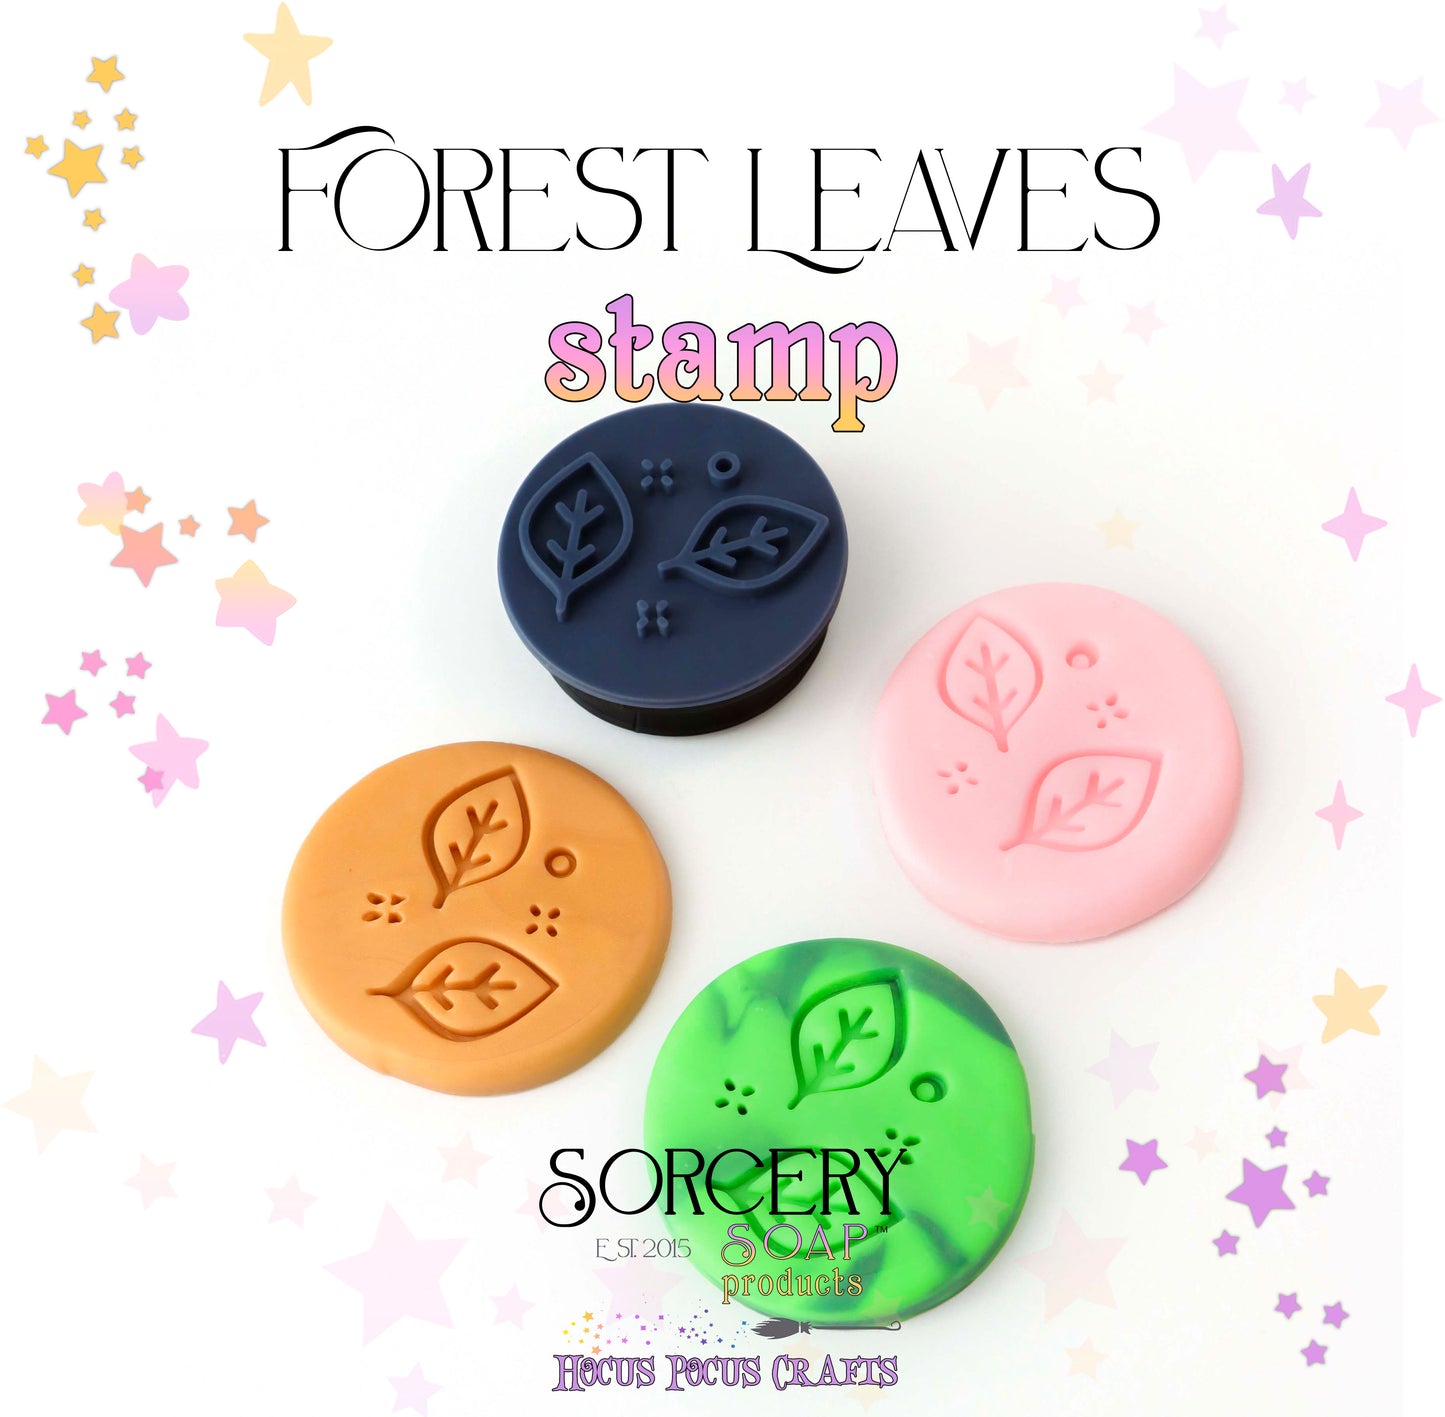 Forest - Leaves Stamp